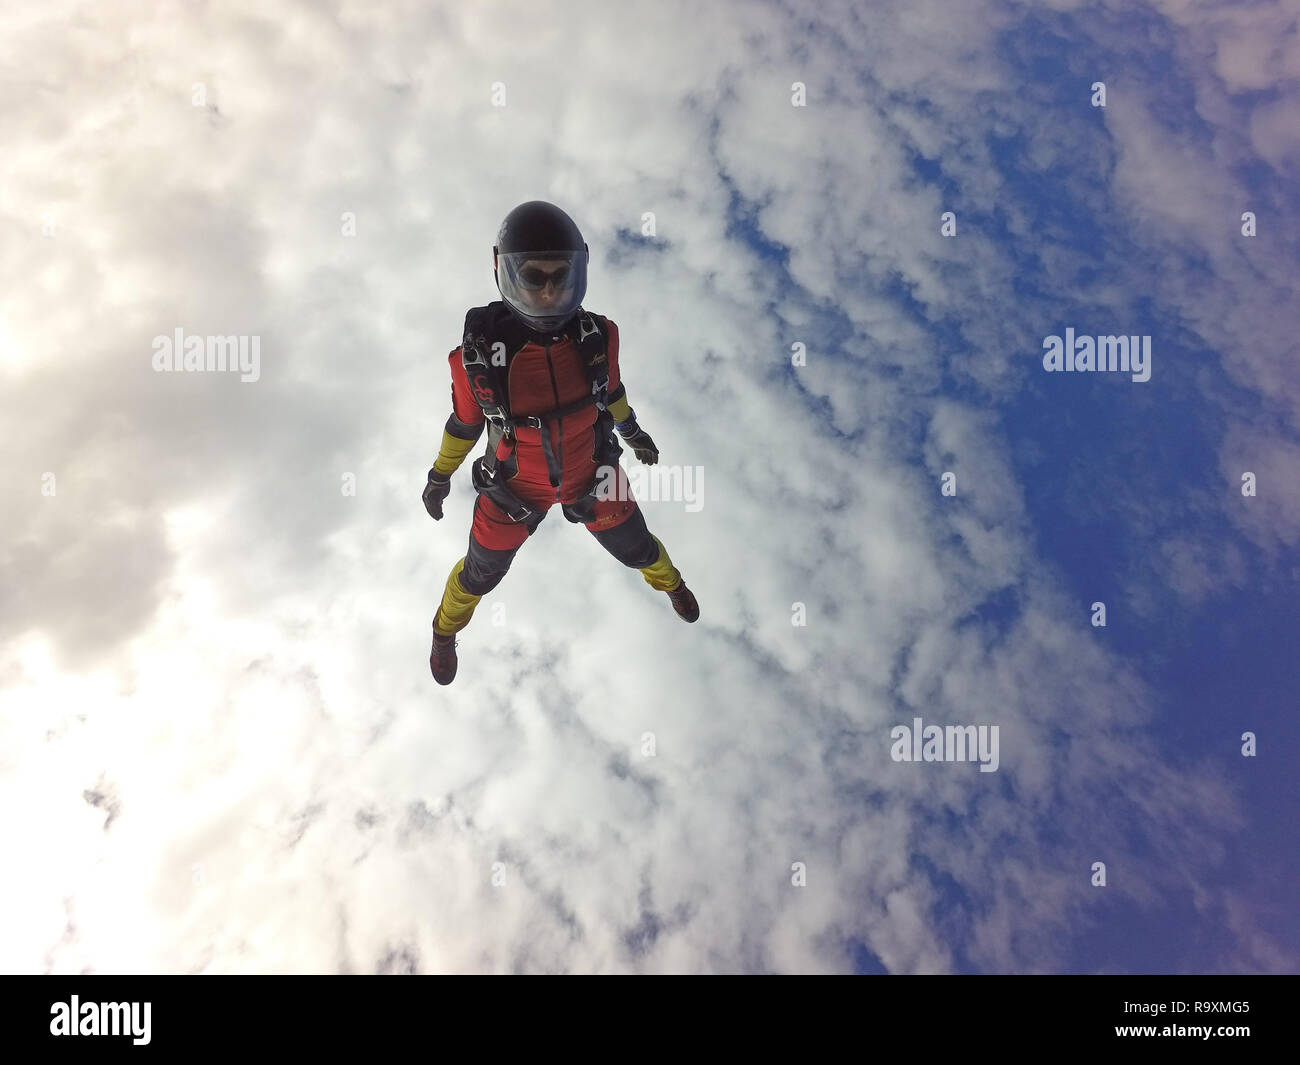 This freefly skydiver is practising some new dive positions in the sky. Thereby the free fall speed is up to 150mph and the jumper has much fun! Stock Photo